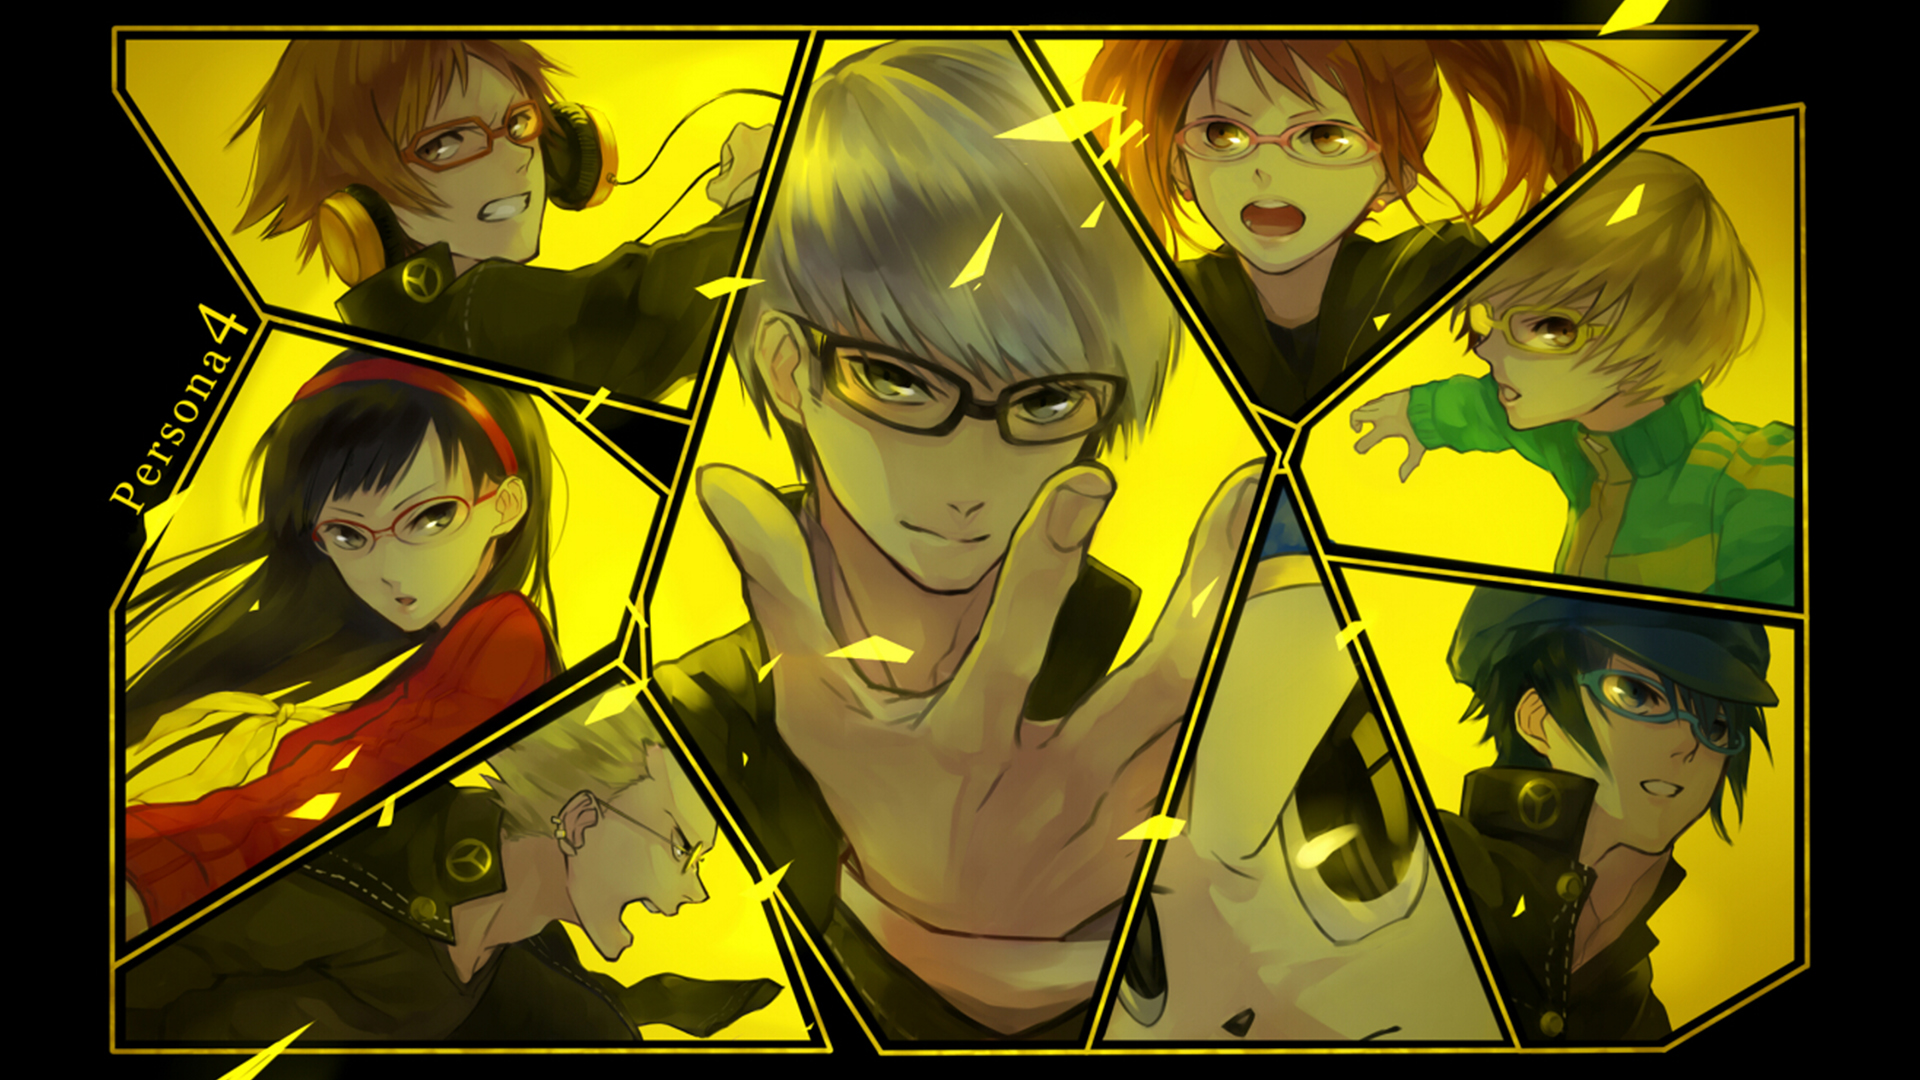 Video Game Persona 4 HD Wallpaper | Background Image